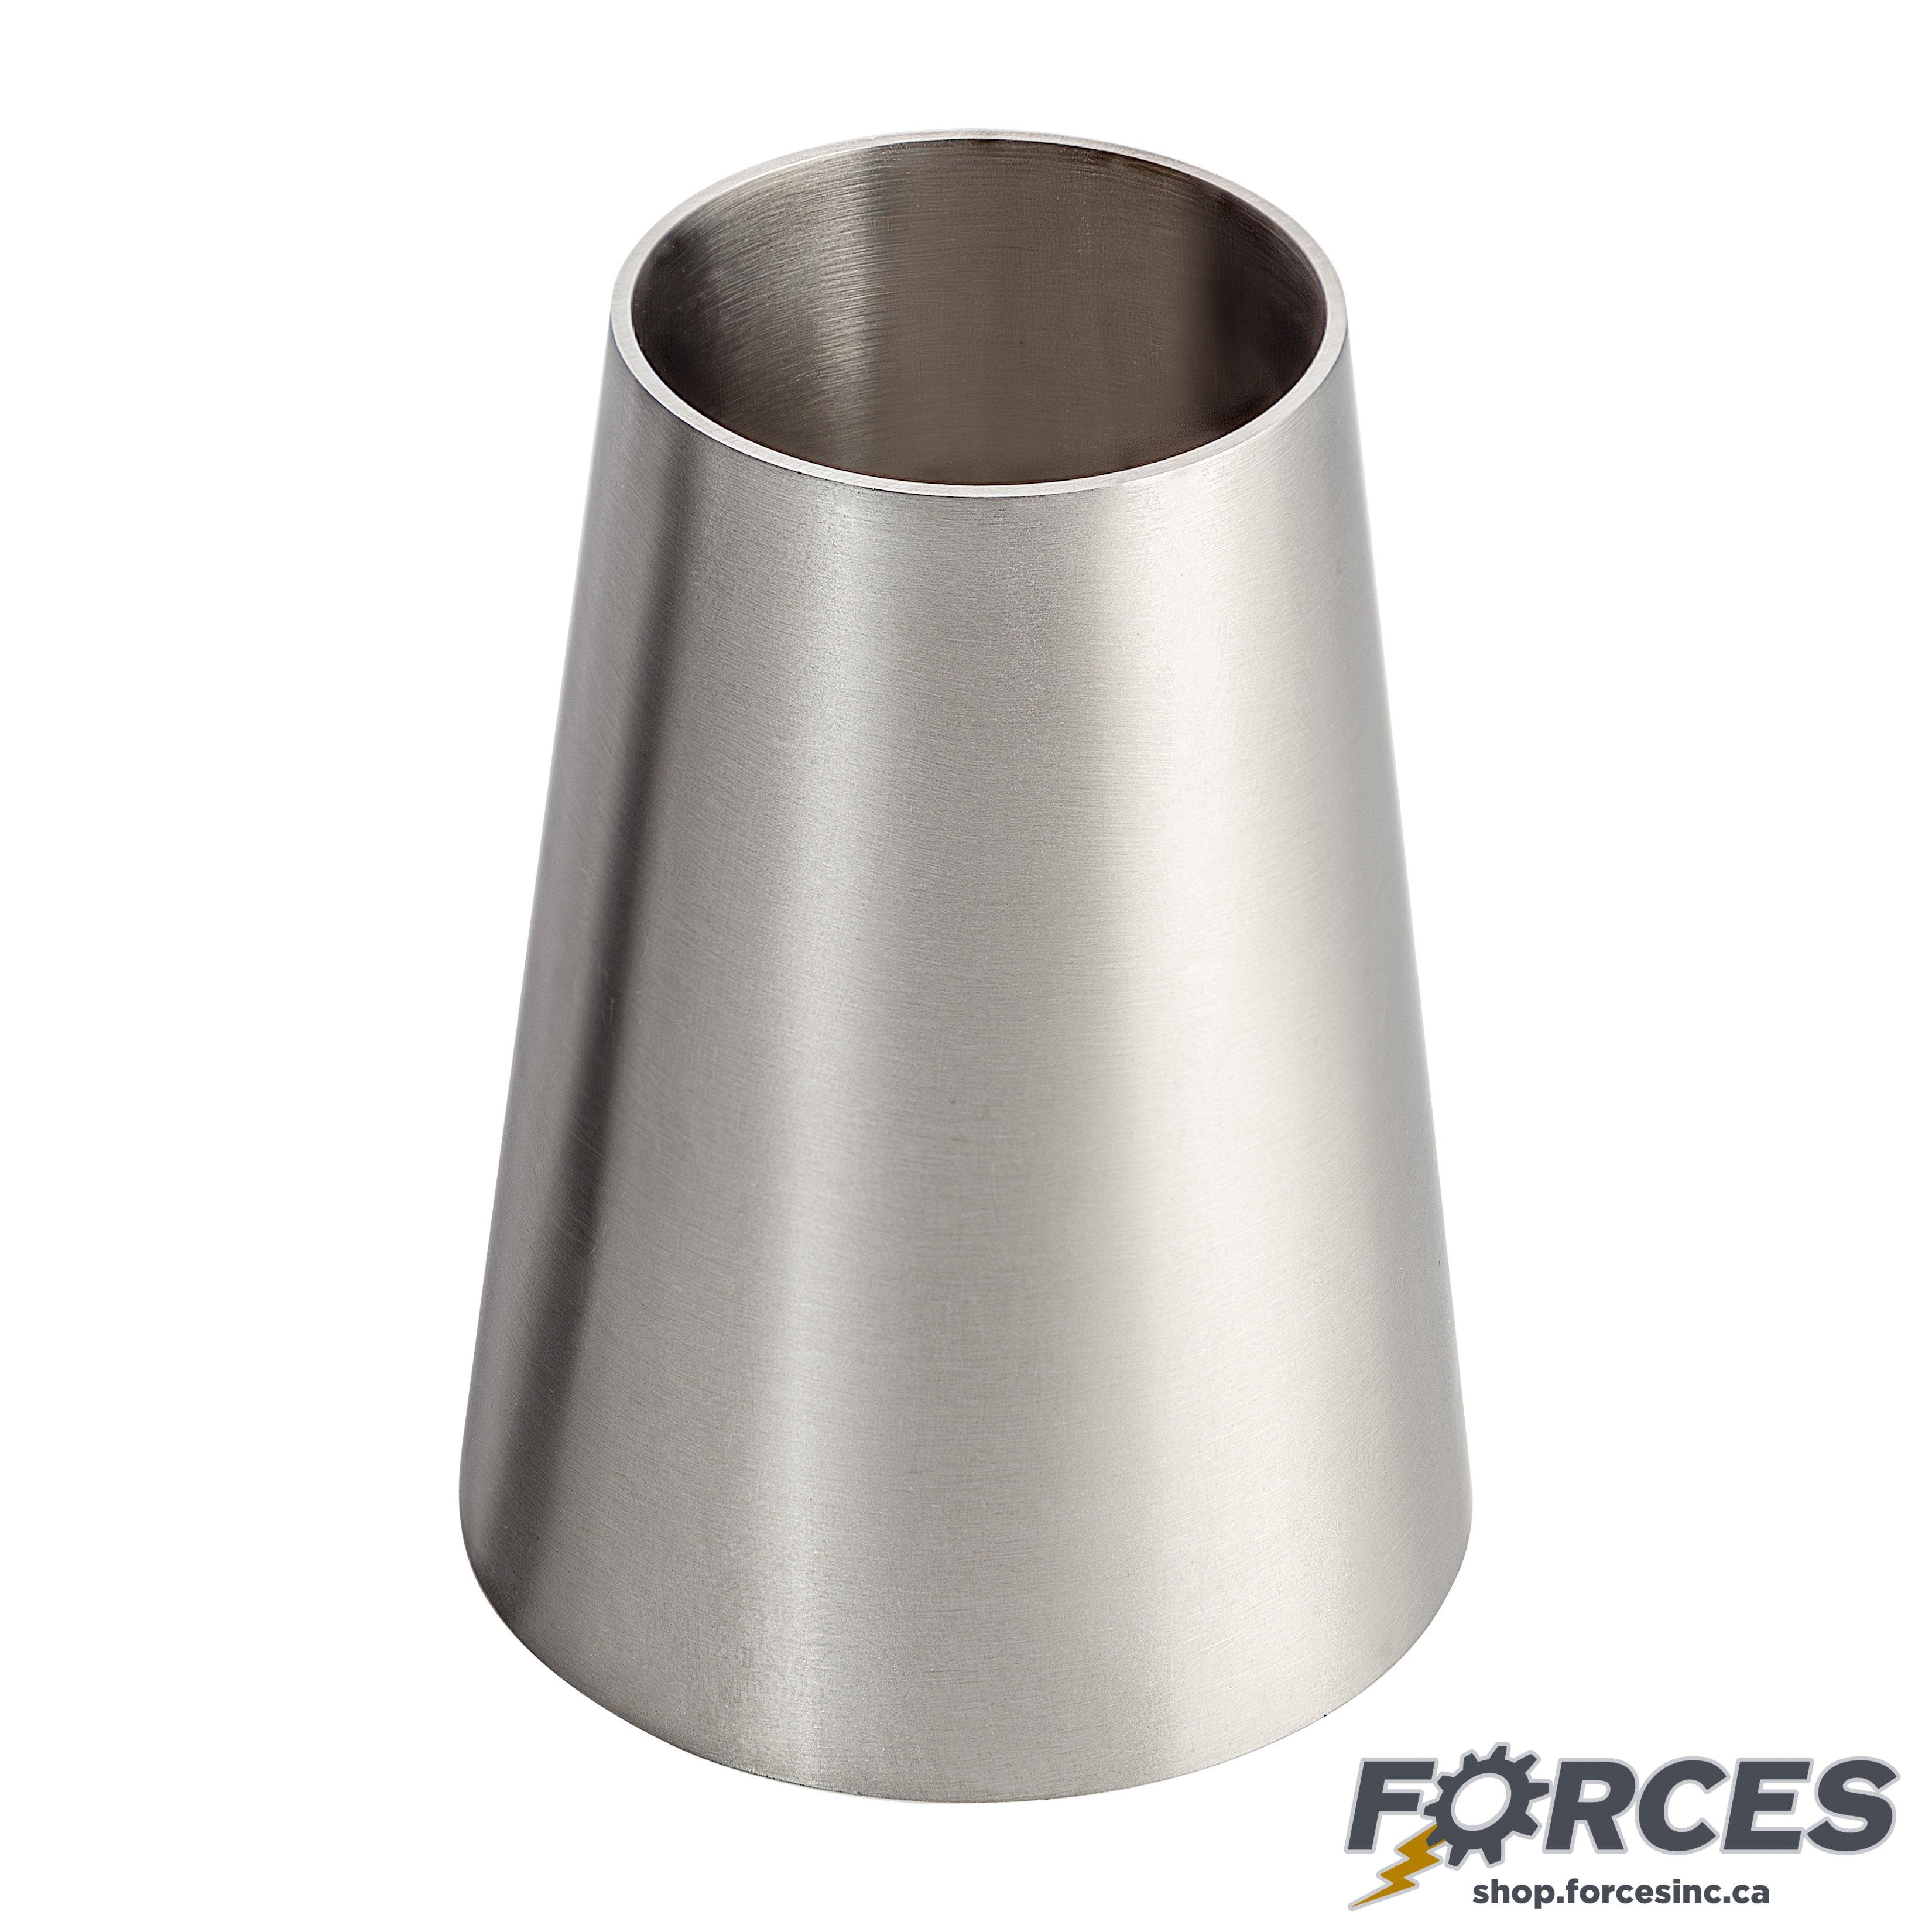 3/4" x 1/2" Butt Weld Concentric Reducer - Stainless Steel 316 - Forces Inc